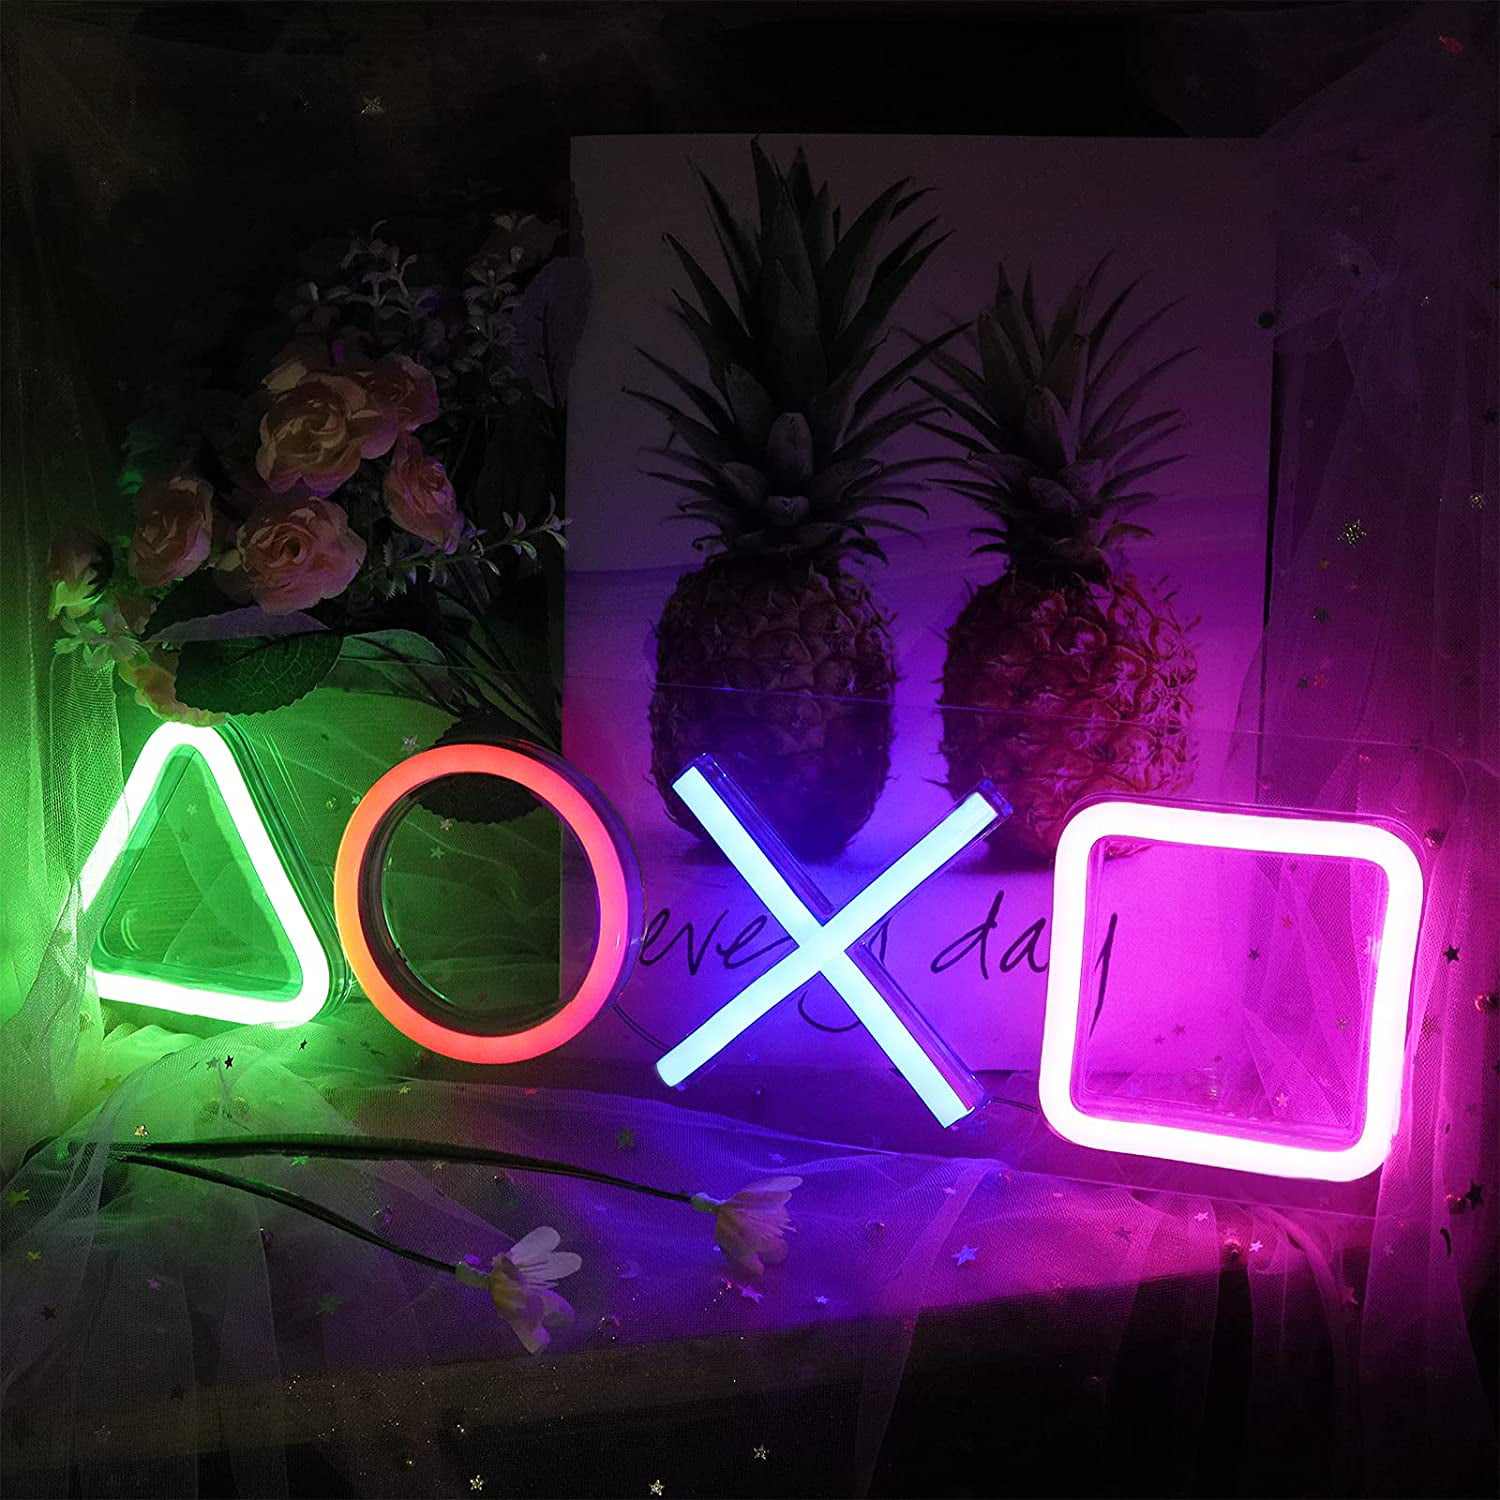 Gaming Neon Signs(16.5''×4.96'') Led Gaming Lights For Playstation Icon Bedroom Wall Decor Acrylic Board Led Light Game Room, Man Cave, Bar Club Decoration - Walmart.com